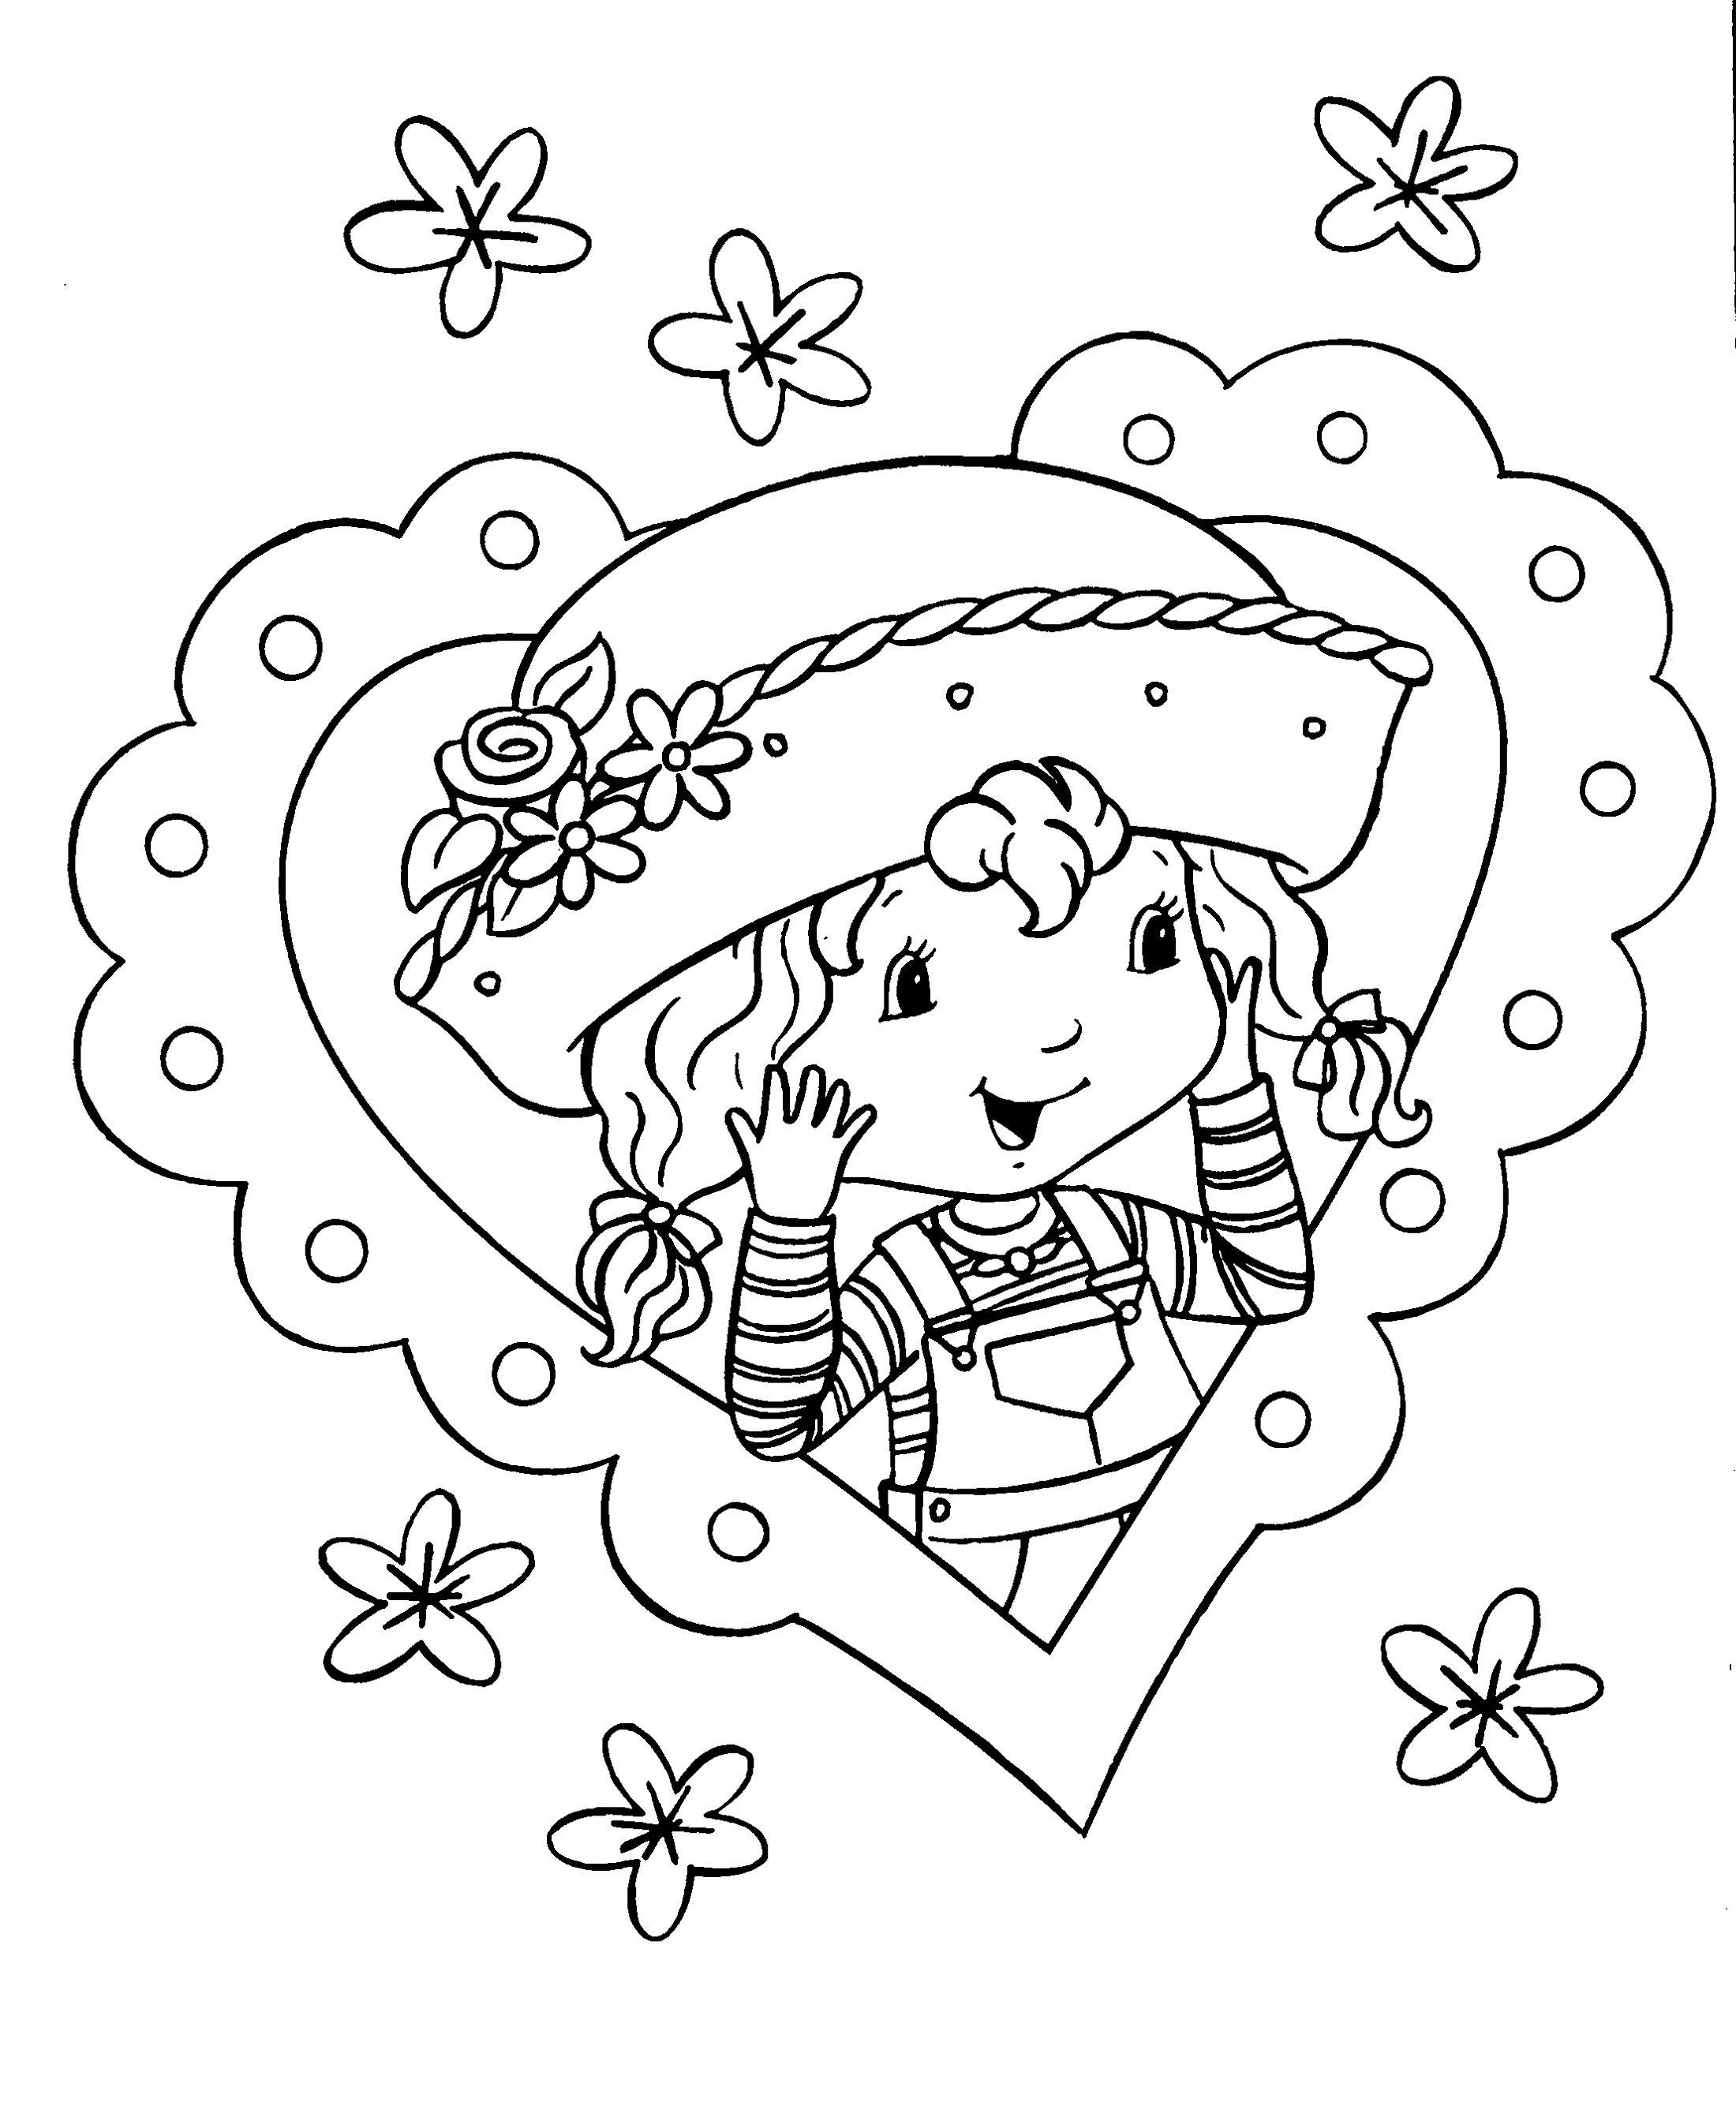 Strawberry Shortcake Coloring Pages for Kids Learning Printable